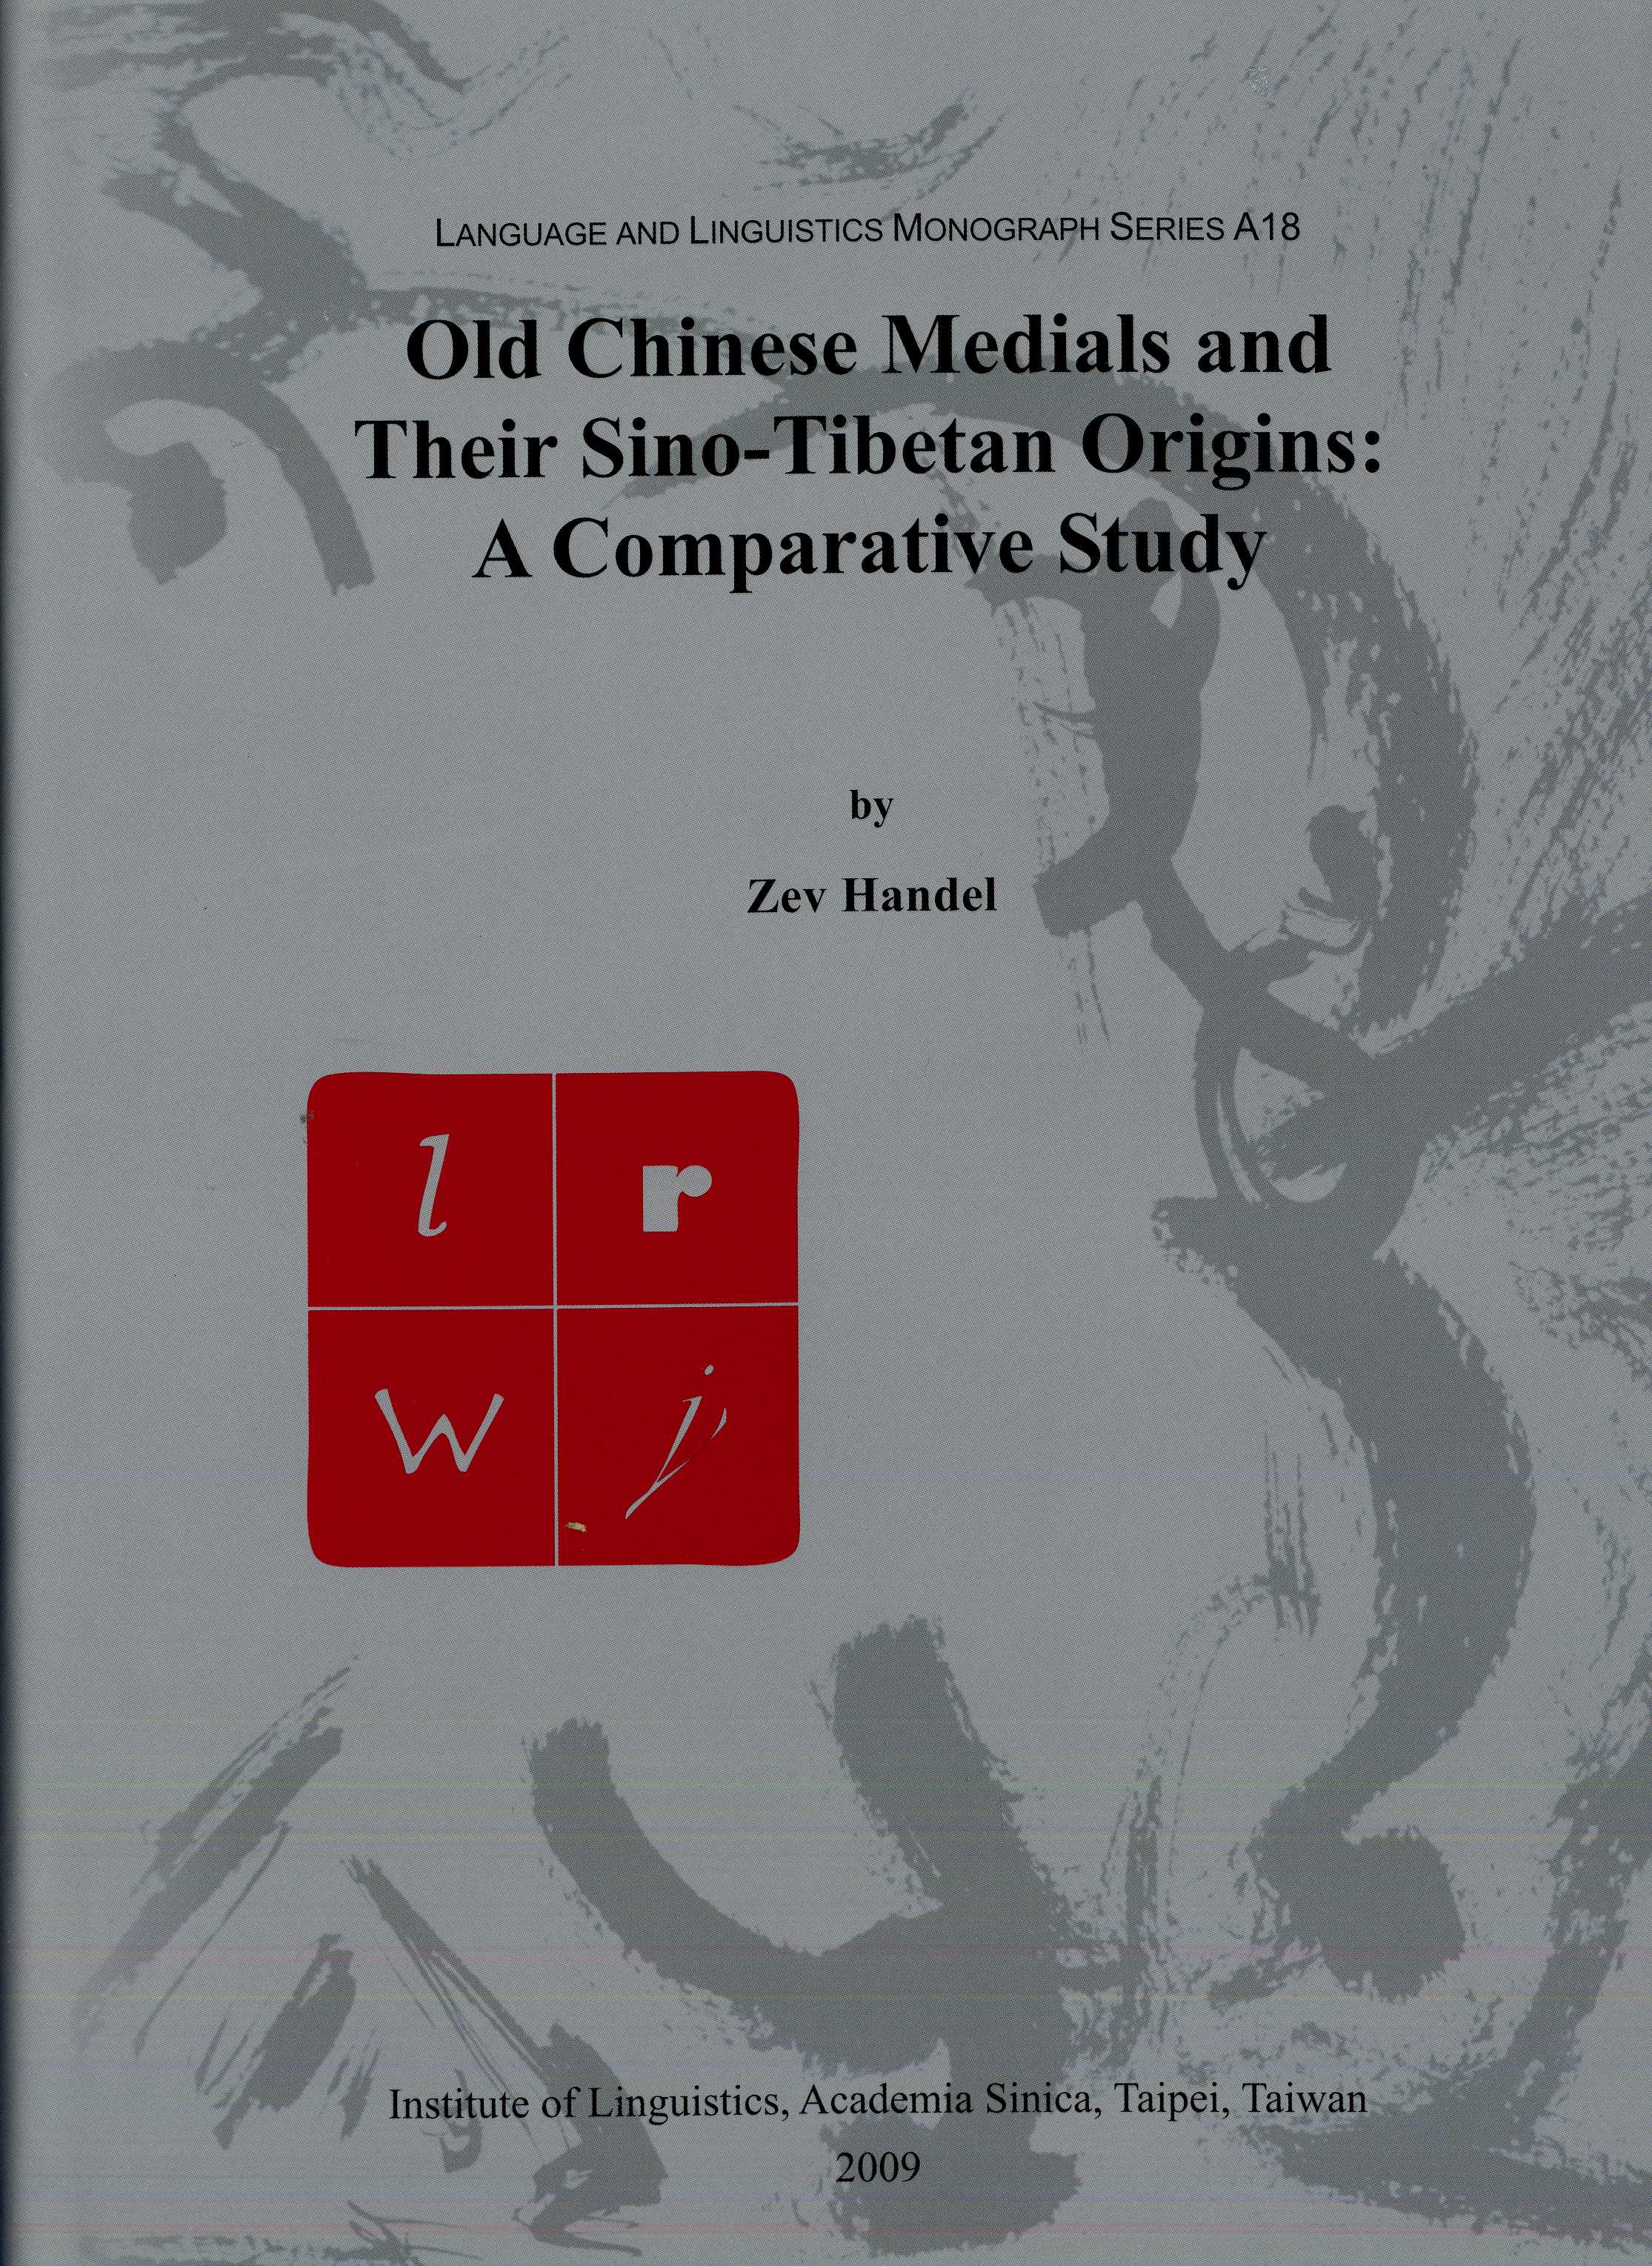 Old Chinese Medials and Their Sino-Tibetan Origins: A Comparative Study